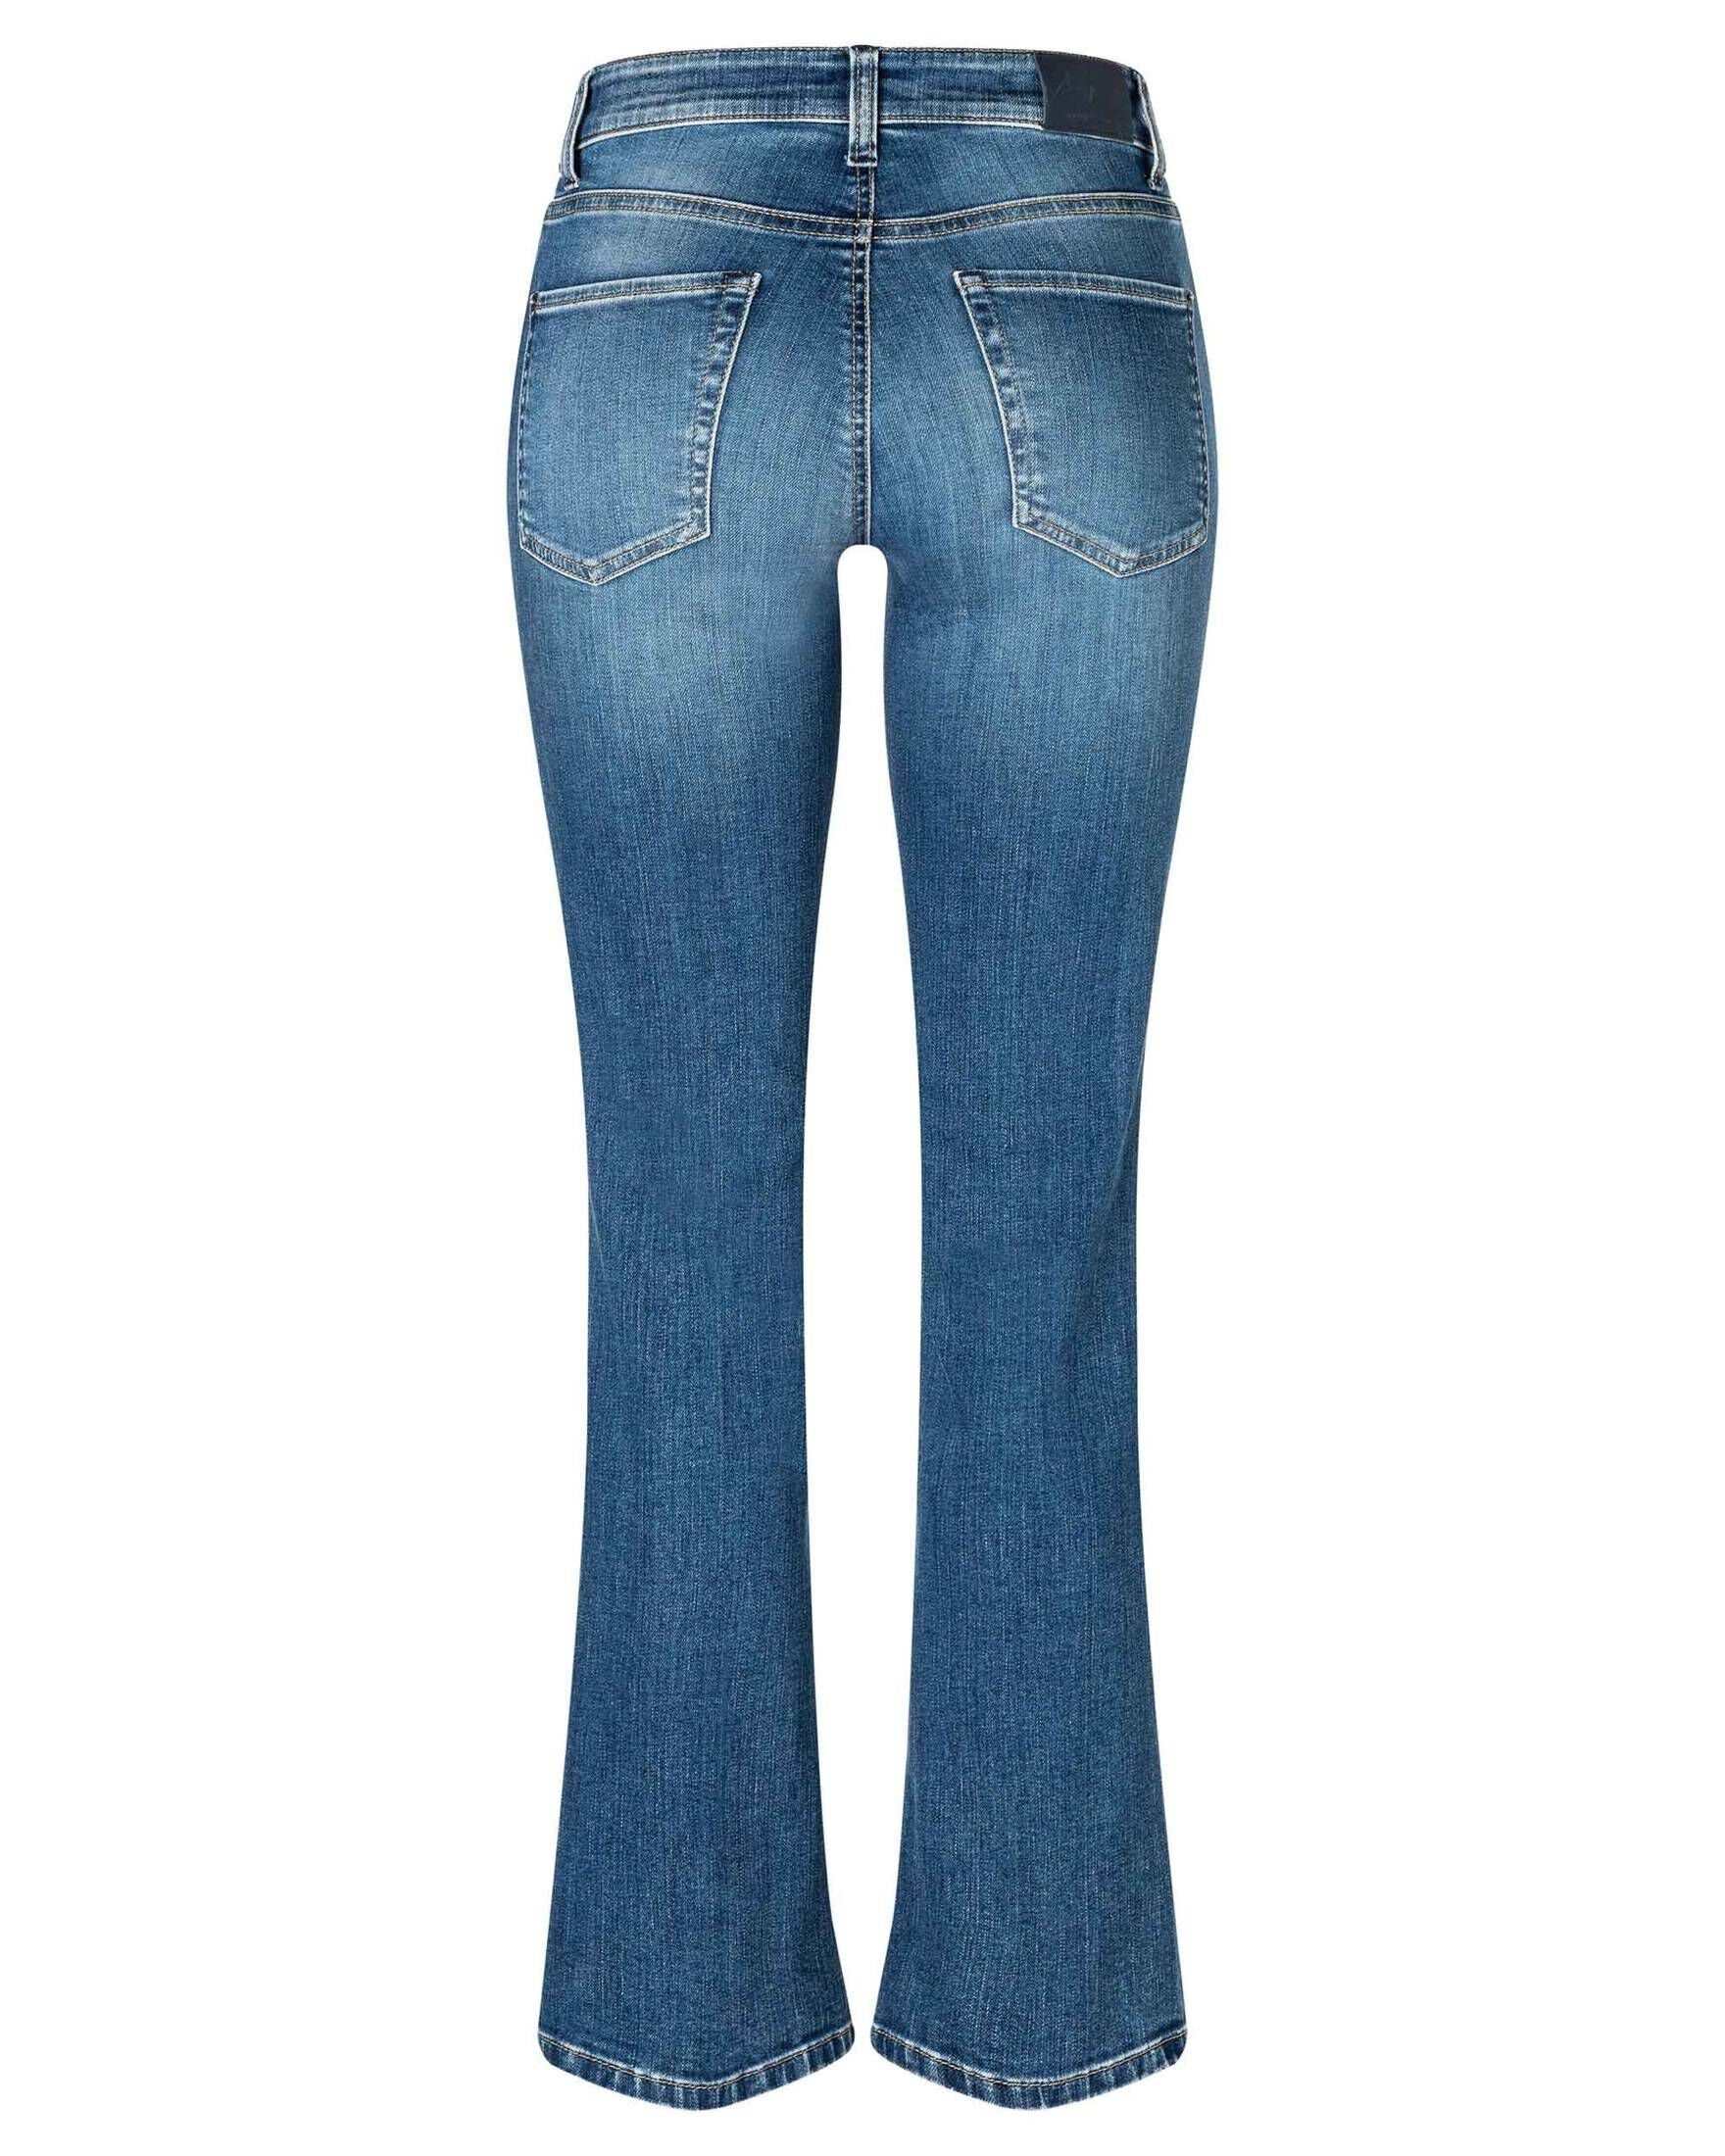 Cambio 5-Pocket-Jeans Bootcutjeans Damen (1-tlg)